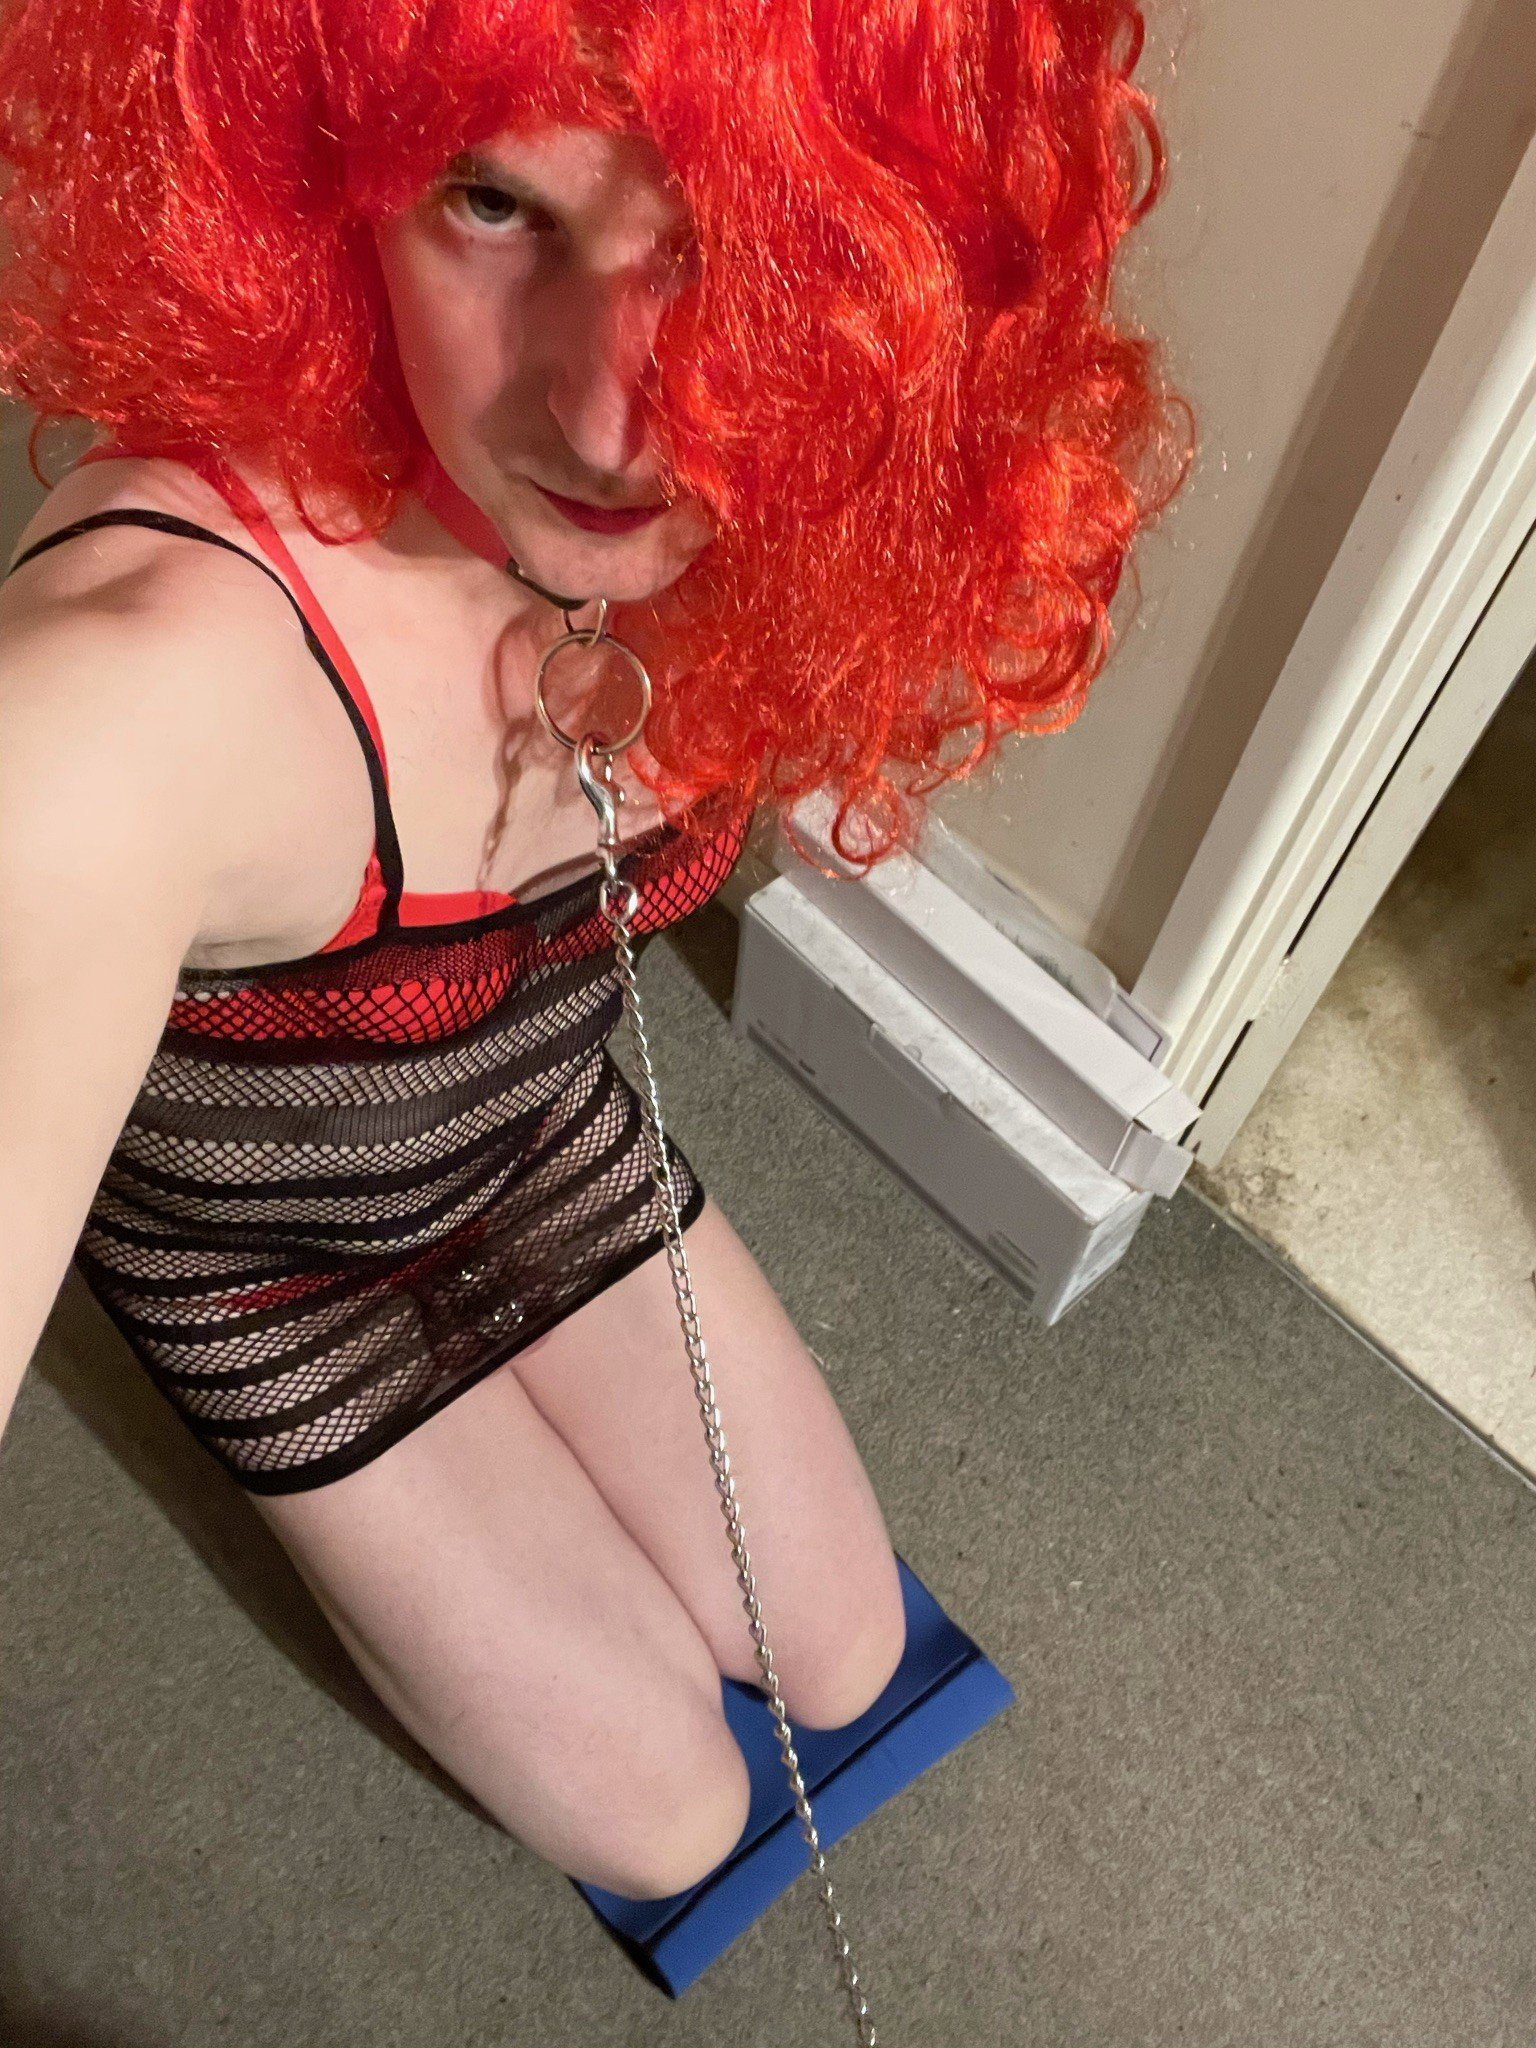 Watch the Photo by sluttxoxx with the username @sluttxoxx, posted on February 8, 2022. The post is about the topic Sissy. and the text says 'W/S whore'